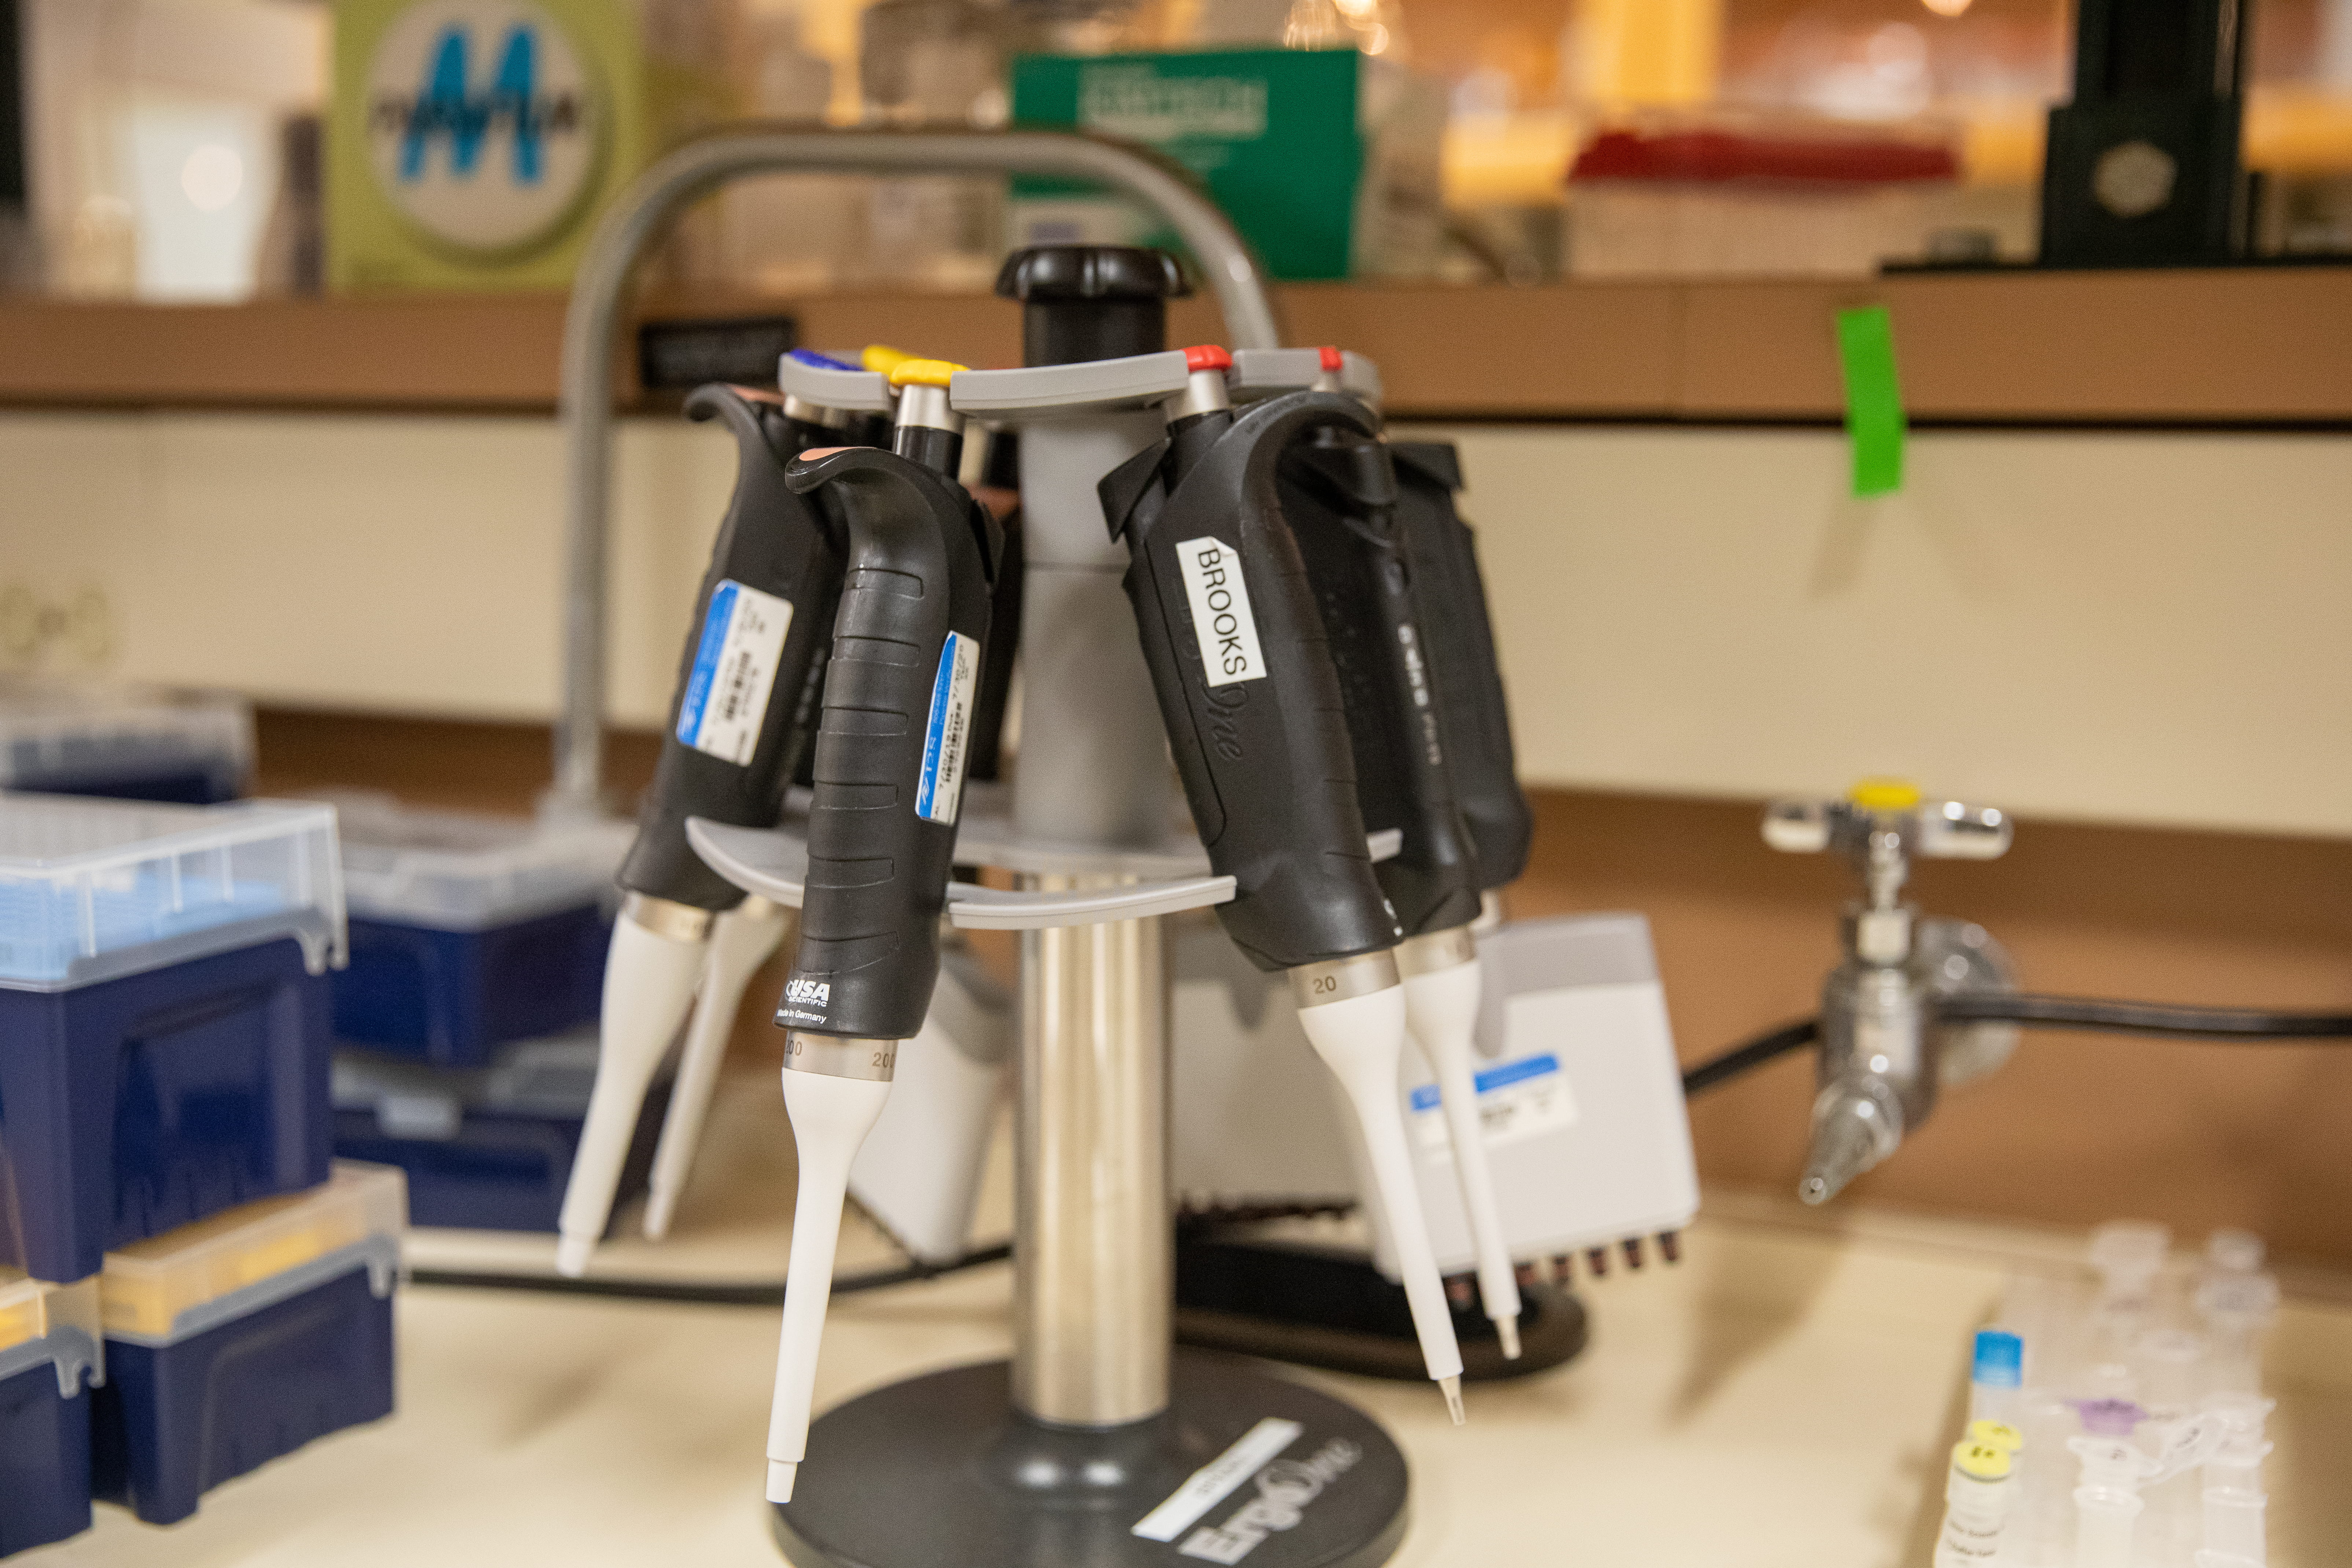 Pipettes hanging in stand on lab bench with pipette tip box and sample tubes visible